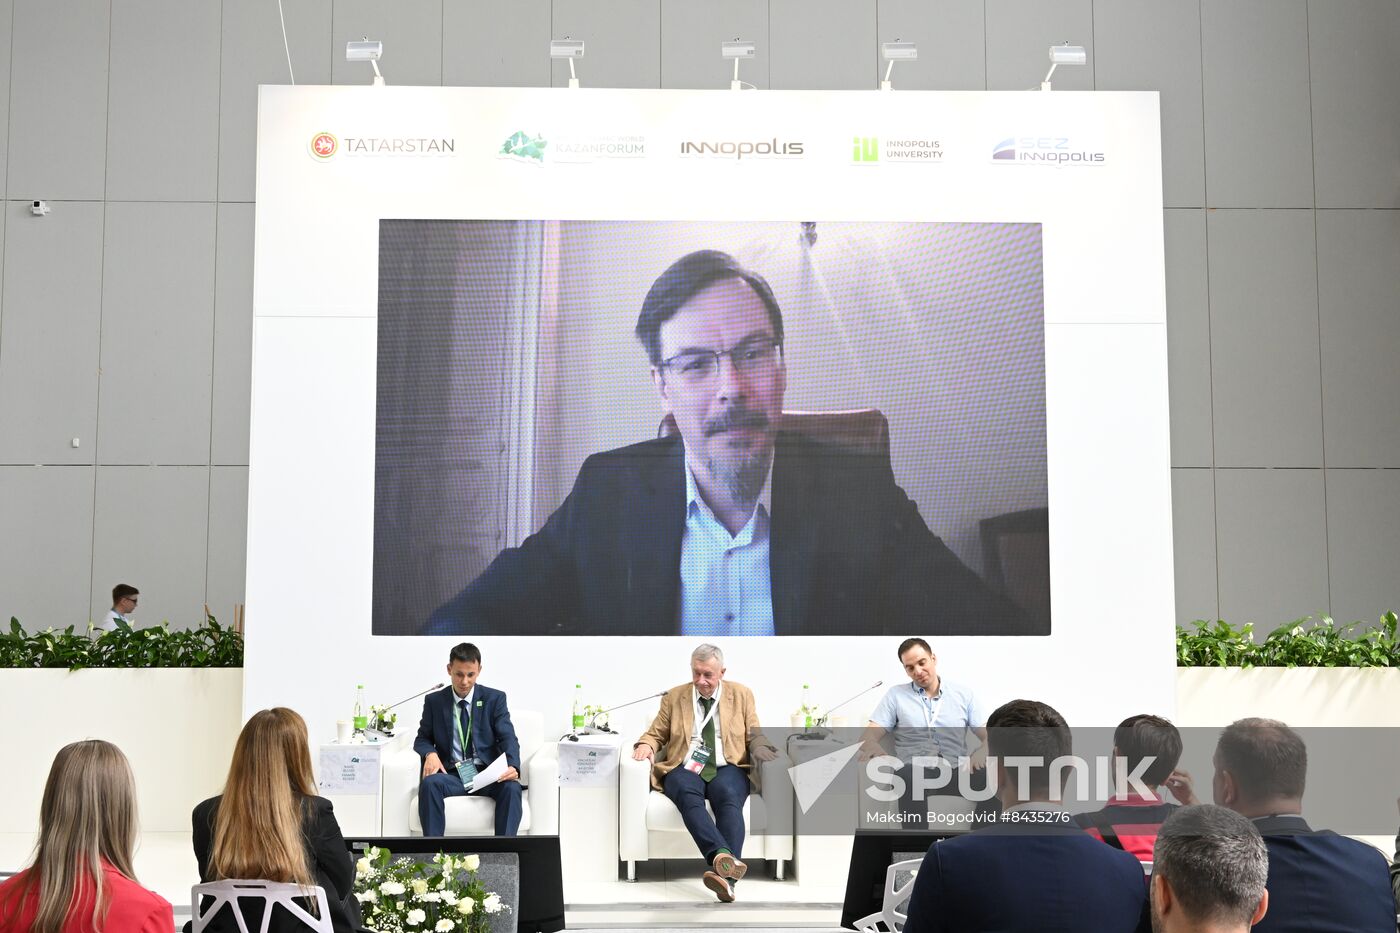 KAZANFORUM 2023. Panel discussion, Artificial Intelligence - Business Maturity: Real Cases